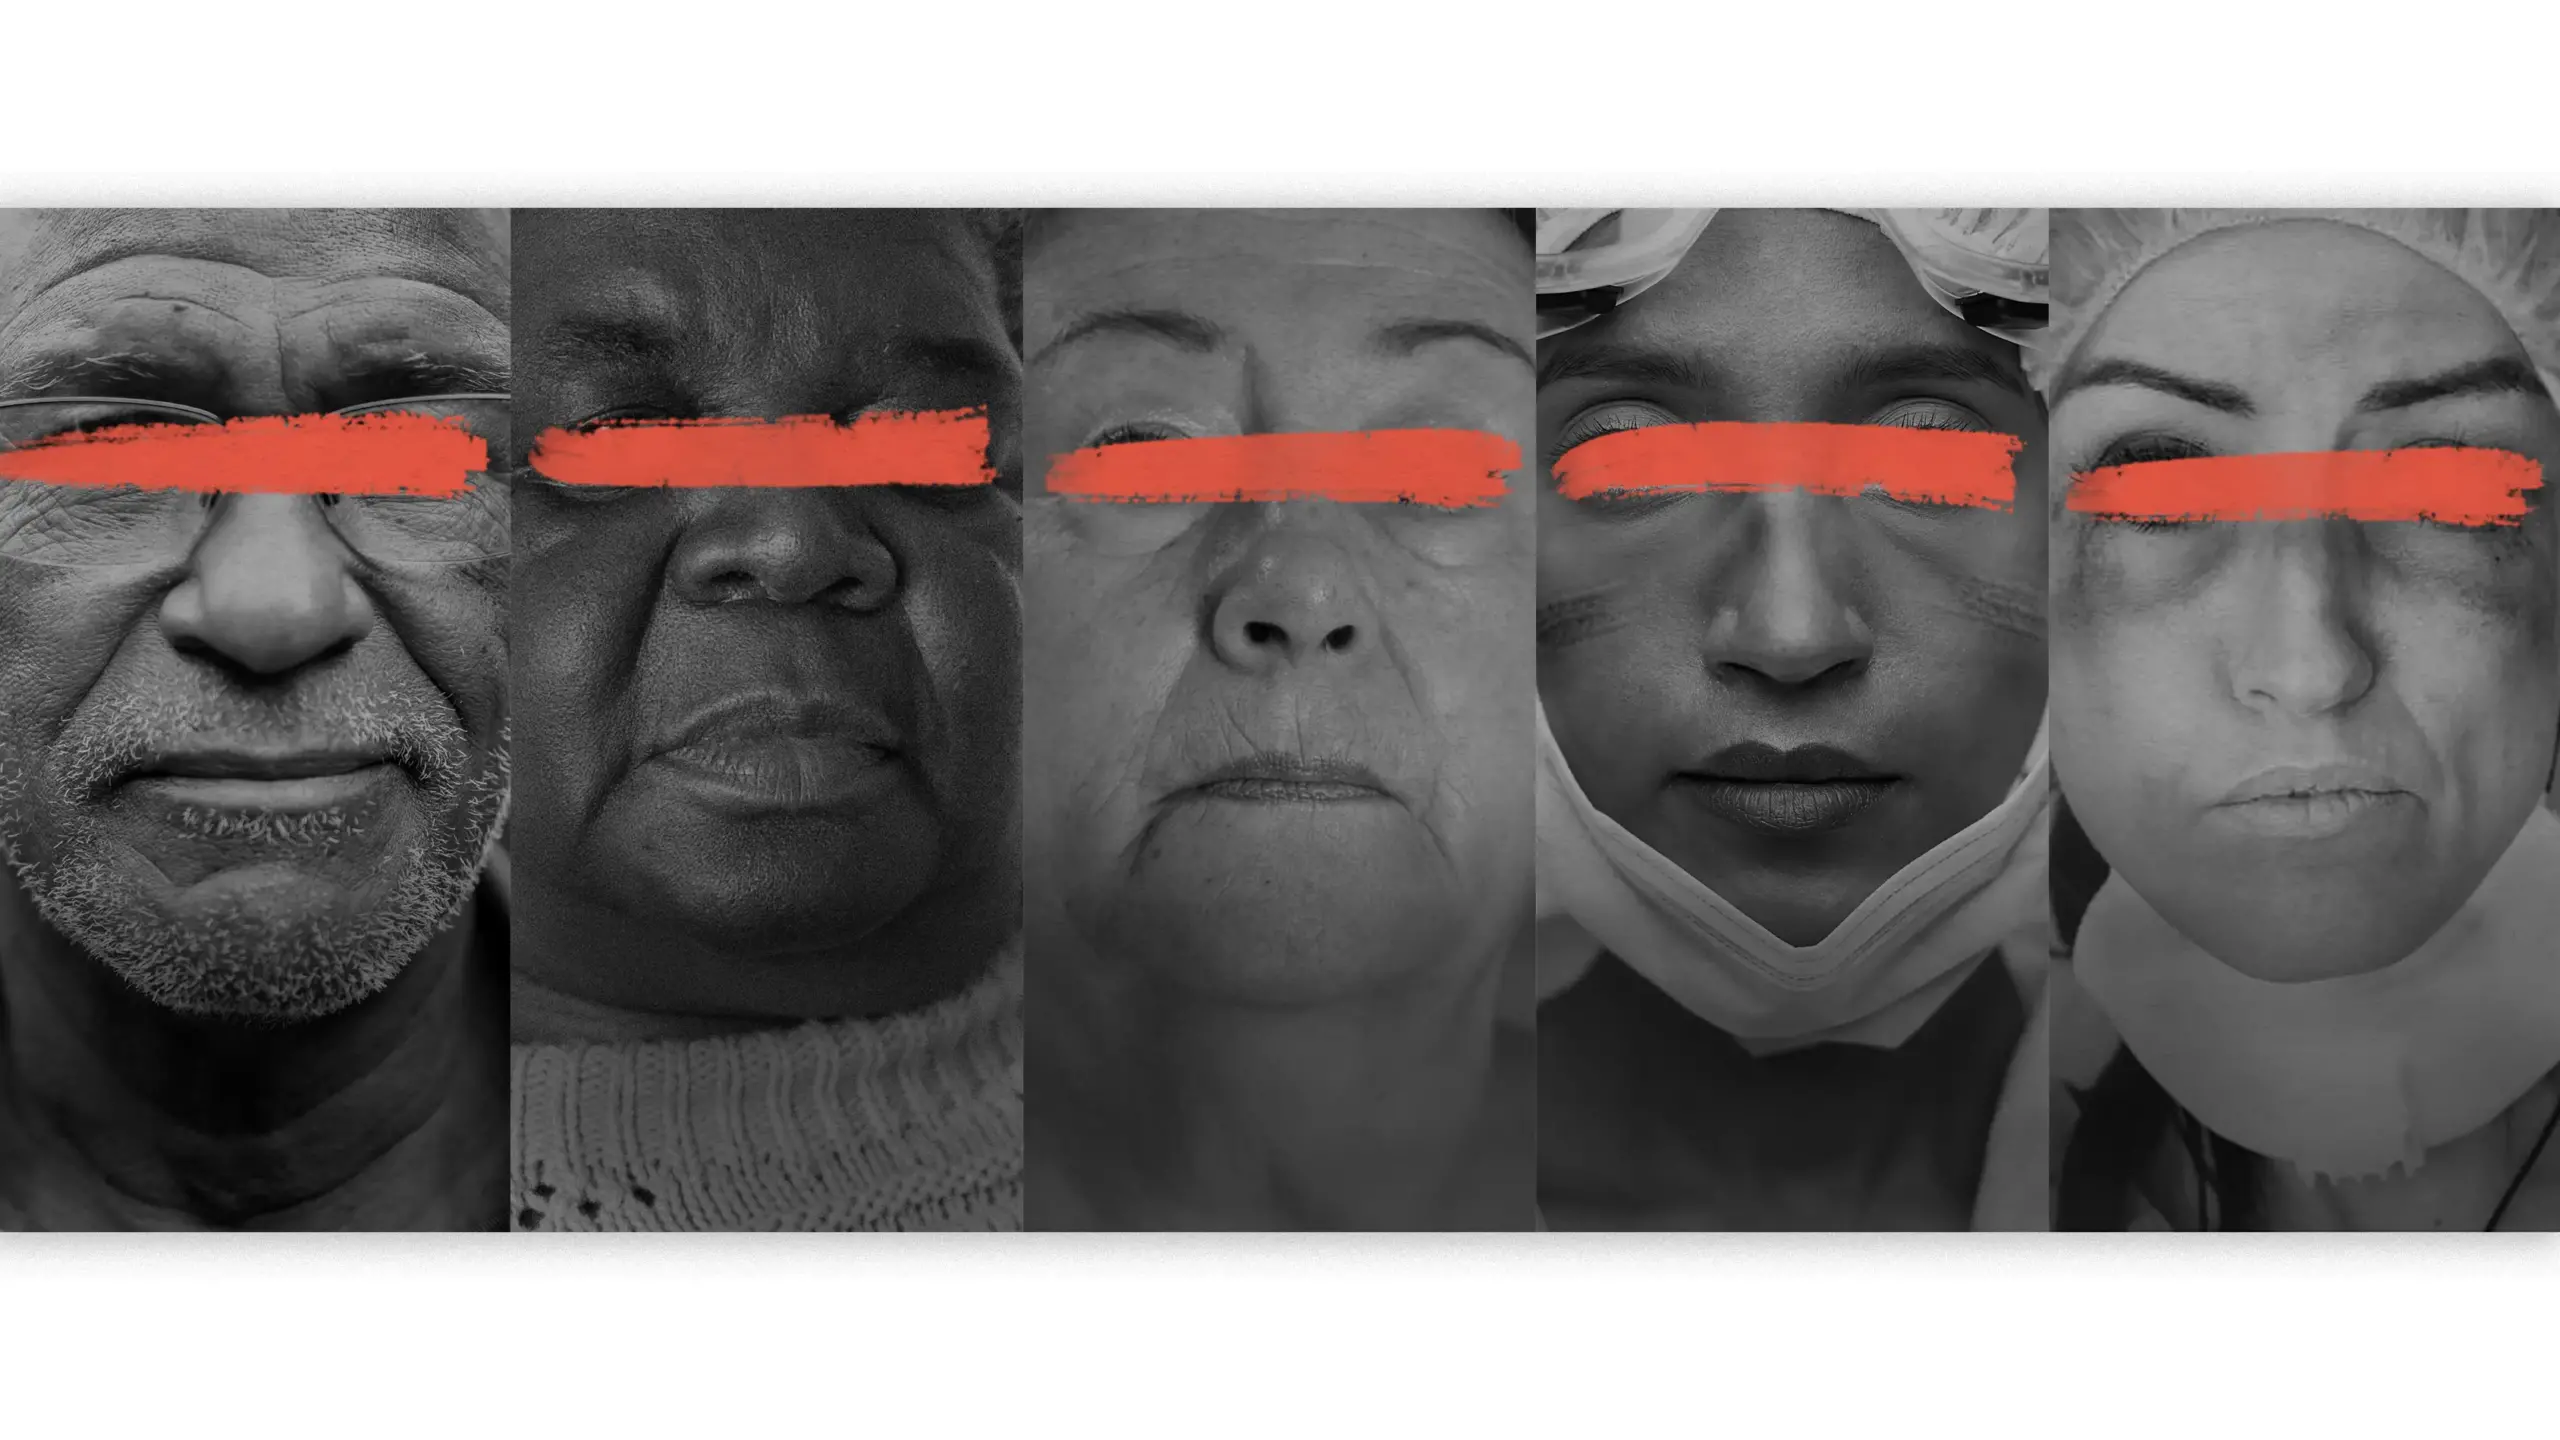 A black and white image features five people of diverse backgrounds side by side, with a red horizontal brushstroke obscuring their eyes. Each person displays a neutral expression, appearing to range in age and occupation, symbolizing the unity in health care advocacy campaigns.